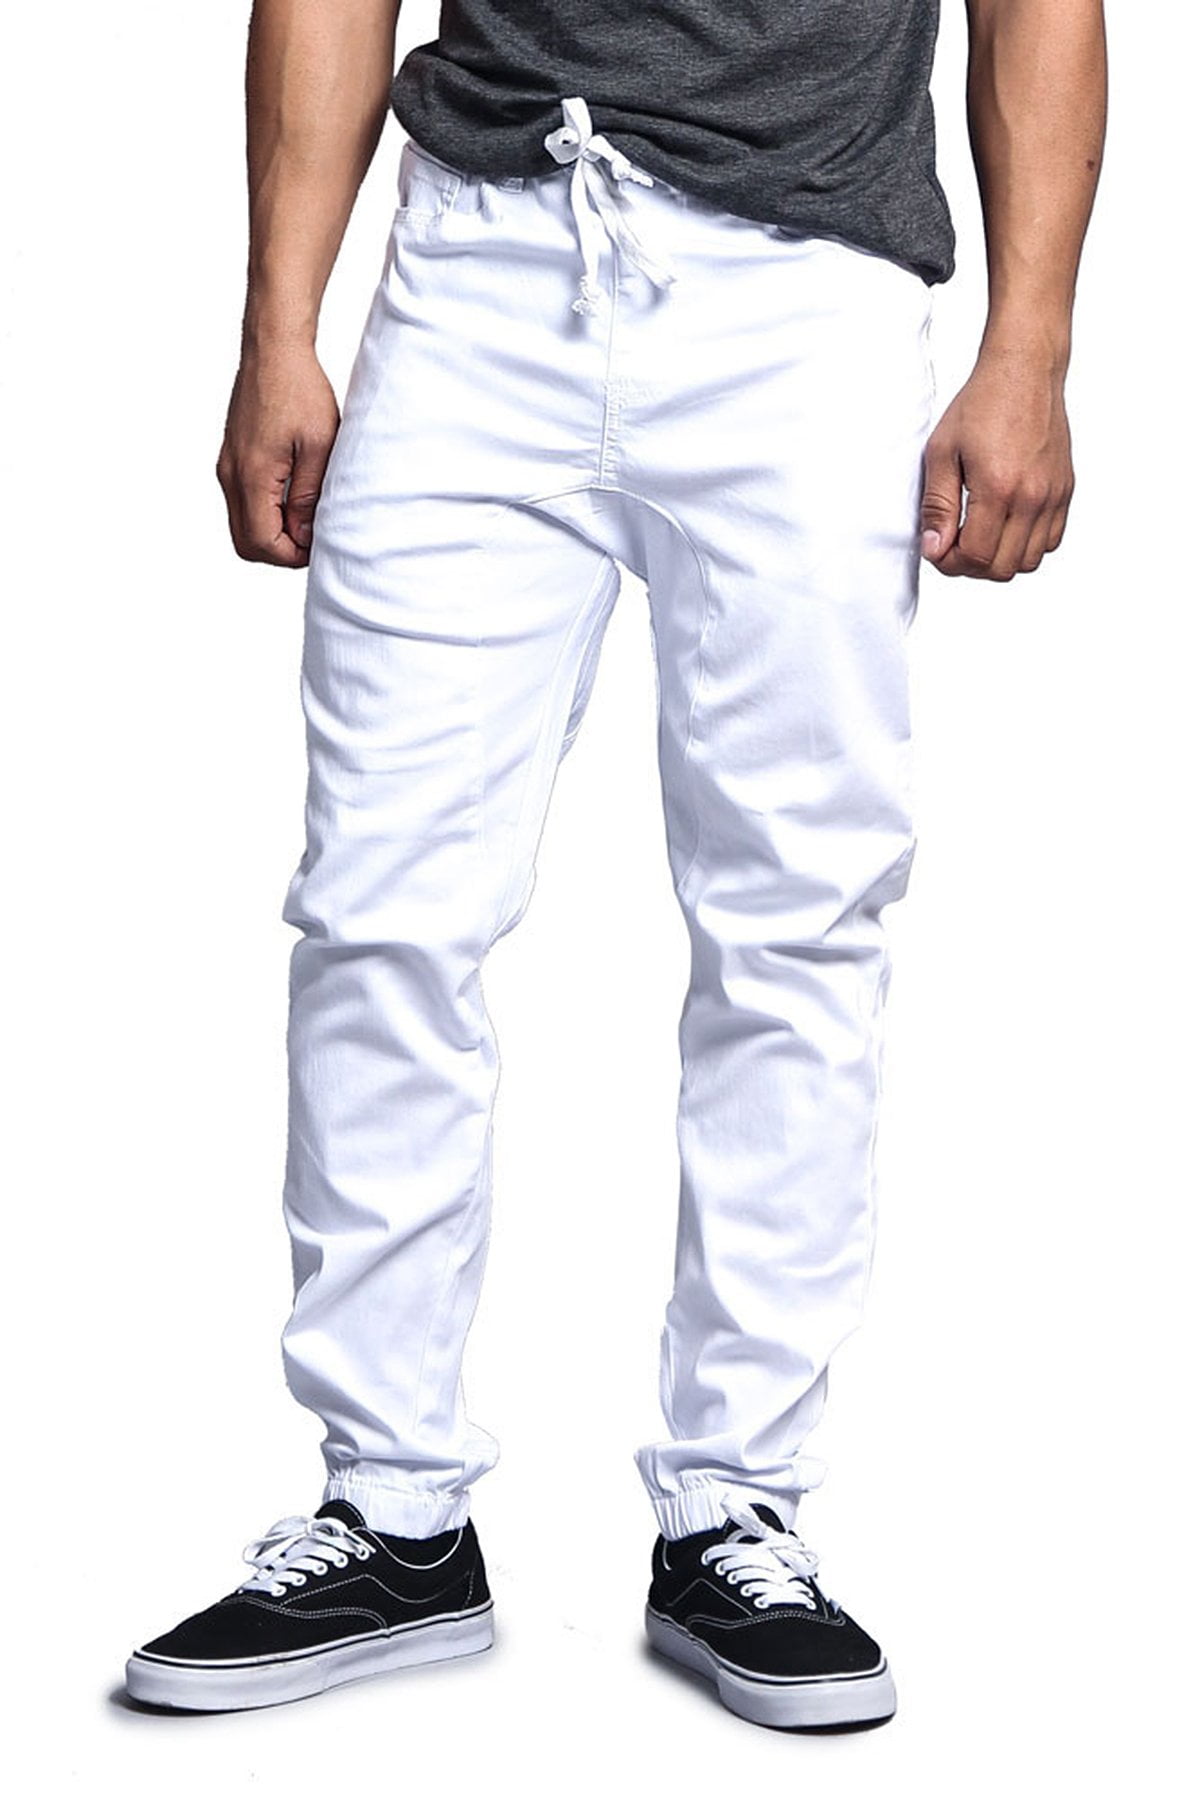 G-Style USA - Victorious Men's Drop Crotch Jogger Twill Pants - White ...